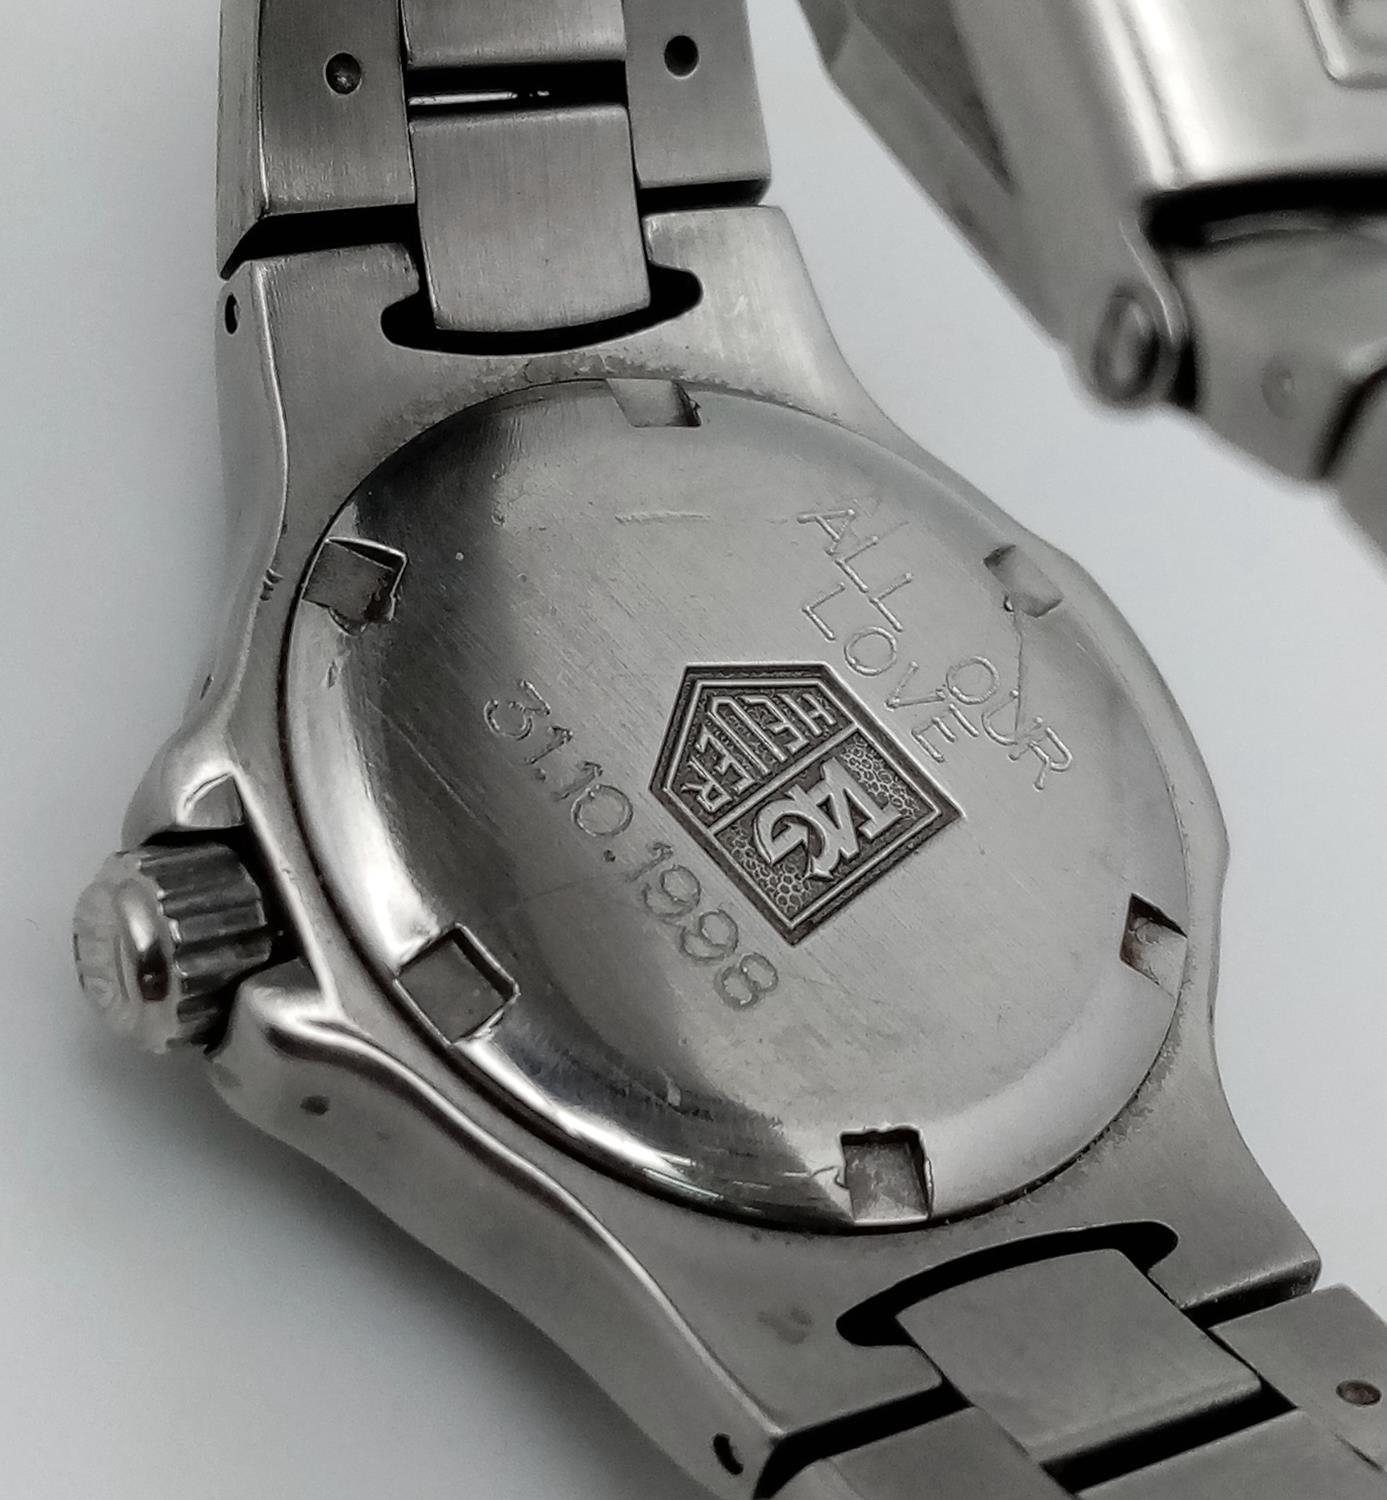 A Tag Heuer Professional Ladies Quartz Watch. Stainless steel bracelet and case - 28mm. Grey dial - Image 8 of 8